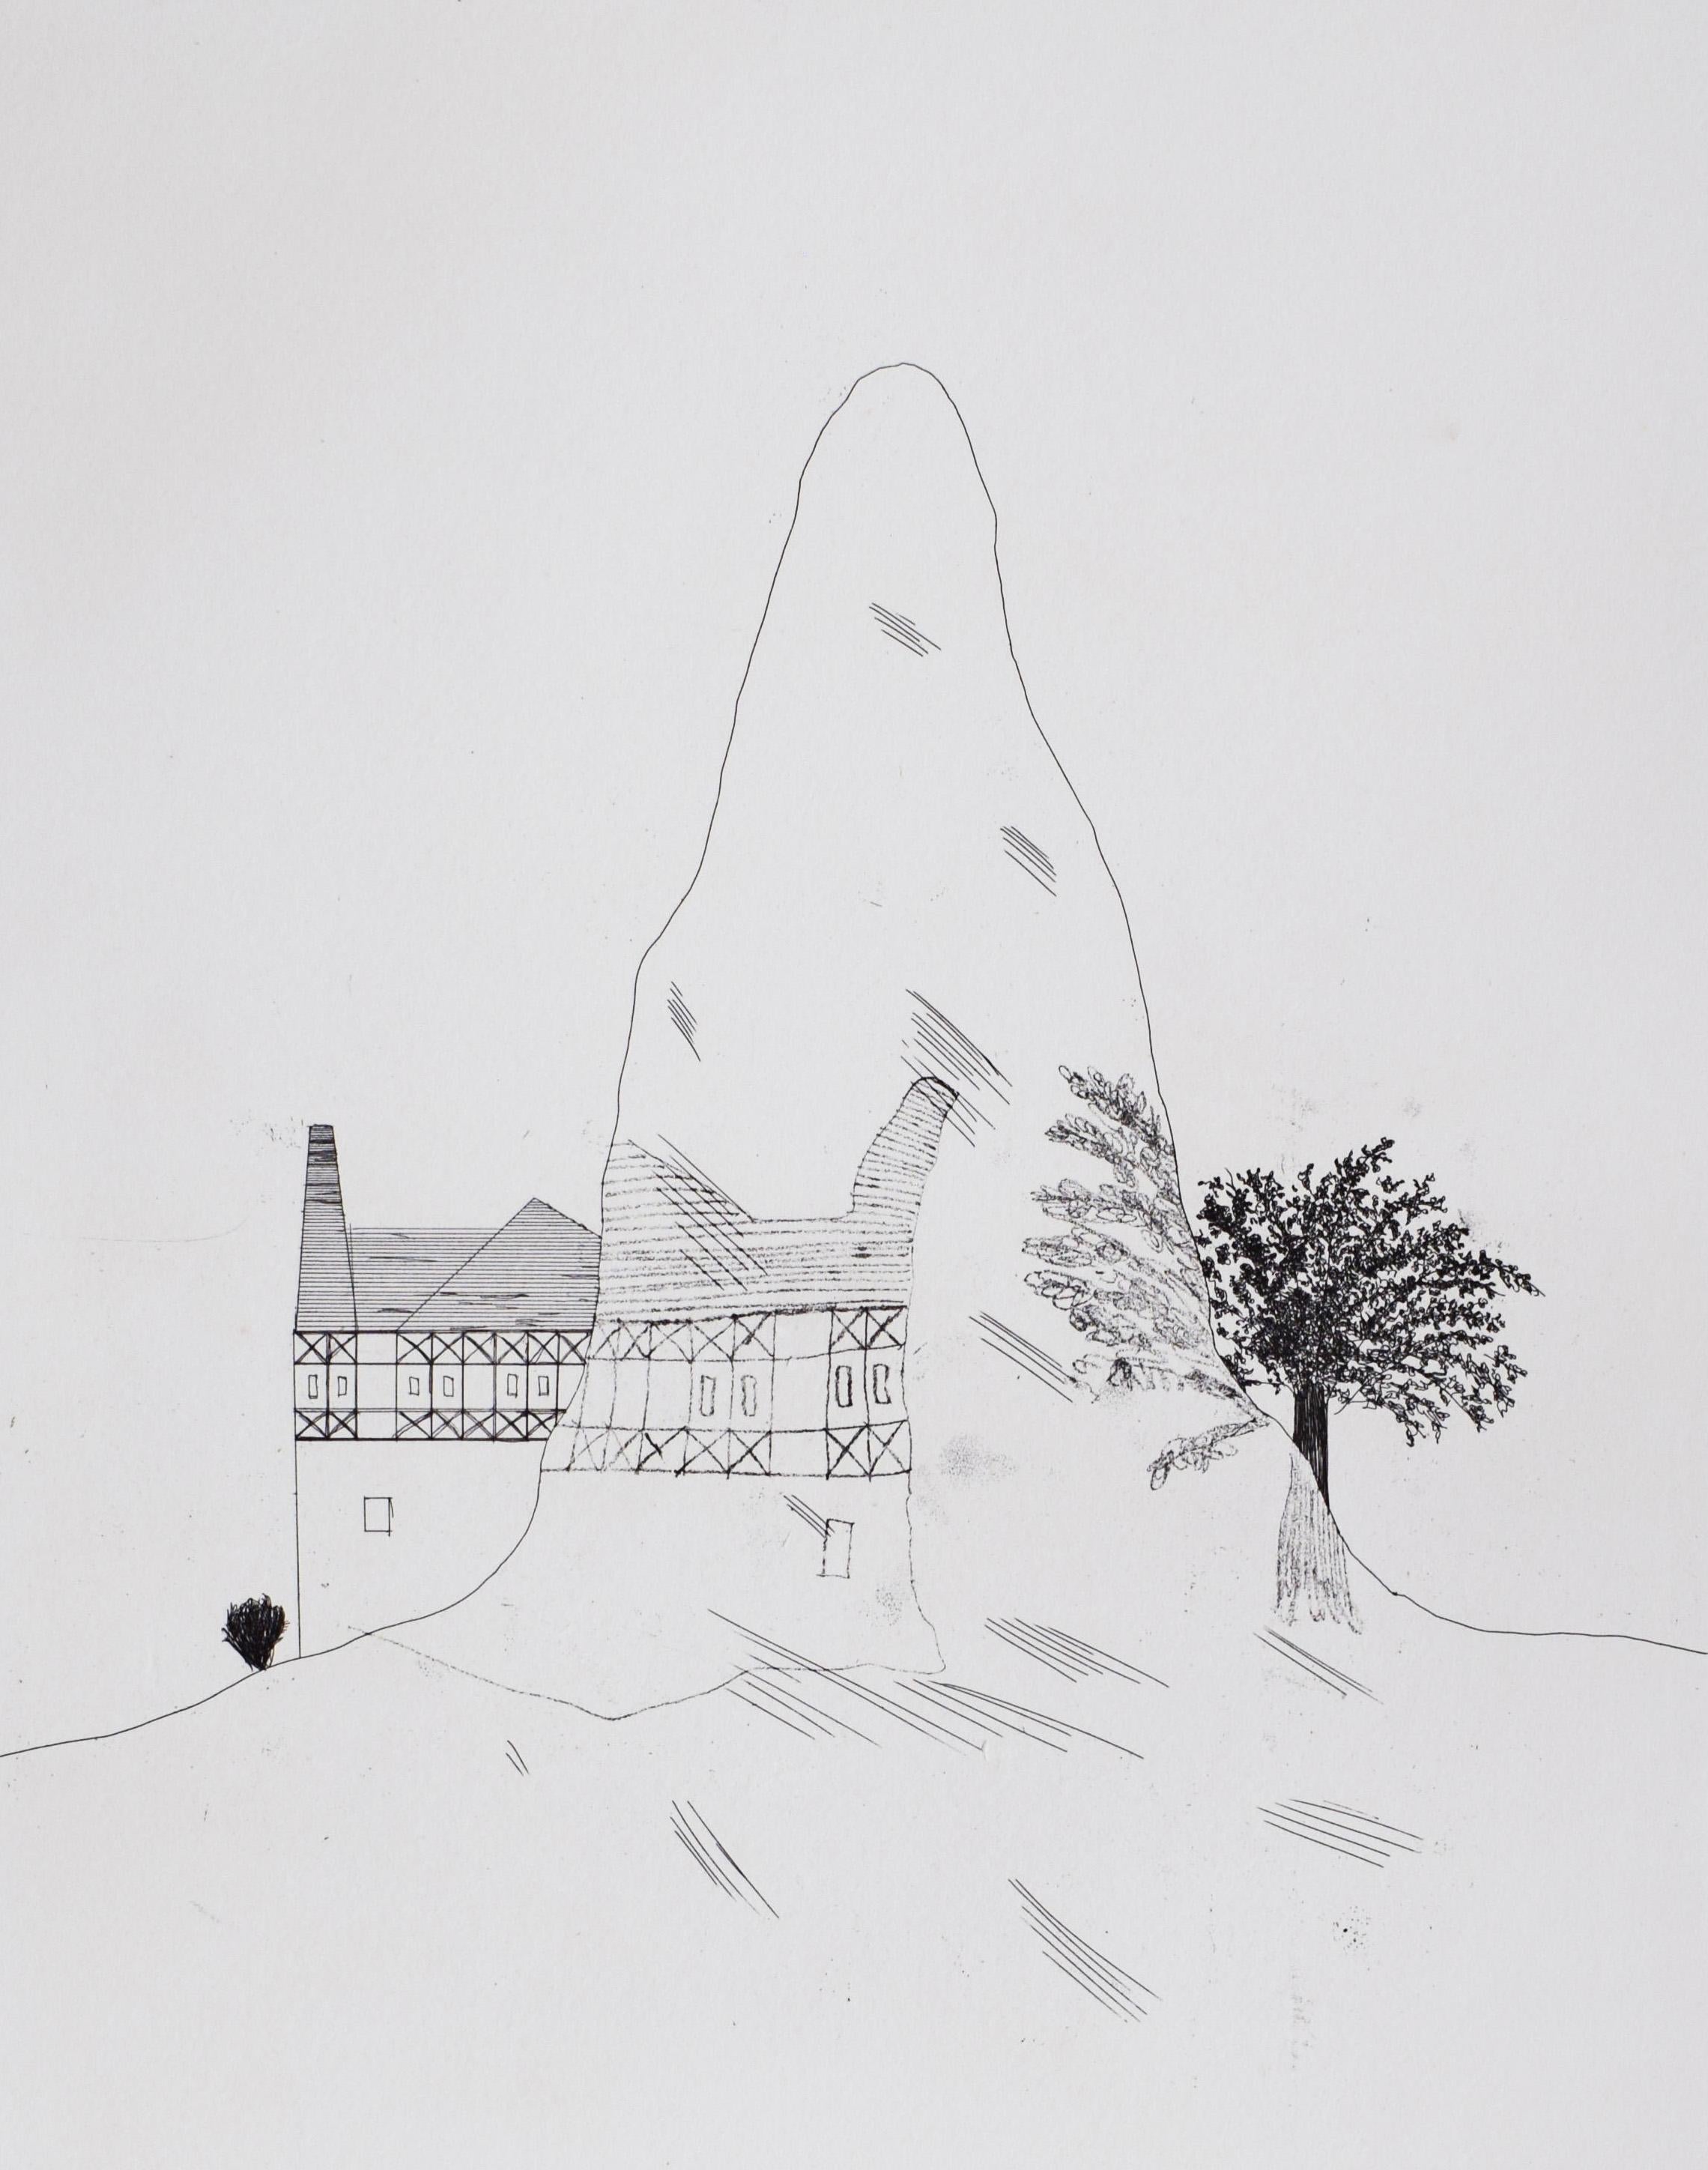 Landscape Print David Hockney - The Glass Mountain (Old Rinkrank), de Six Fairy Tales from the Brothers Grimm